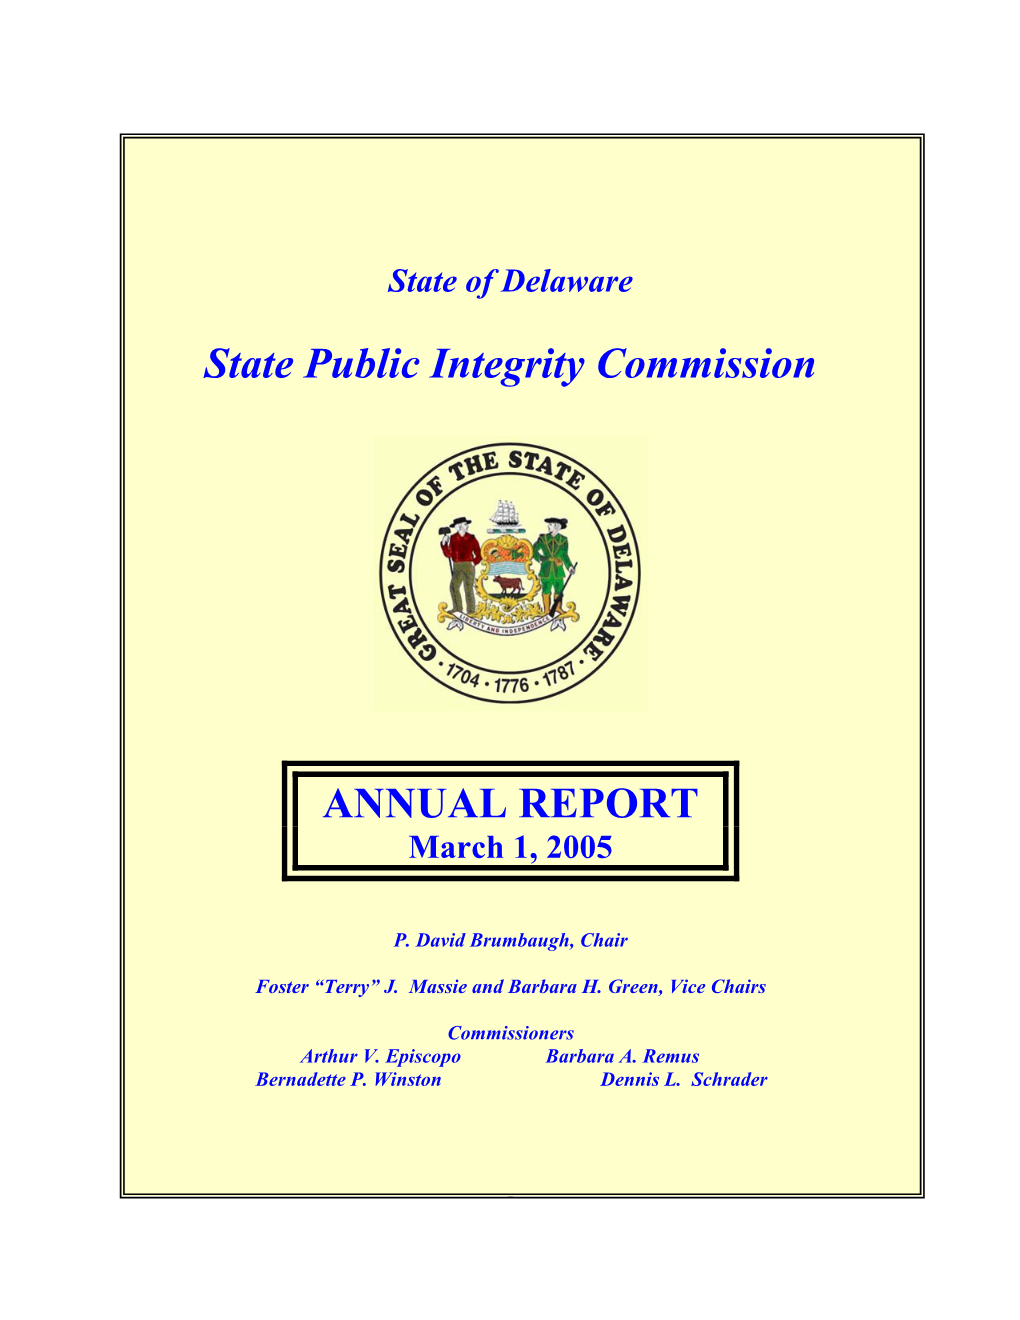 State Public Integrity Commission ANNUAL REPORT